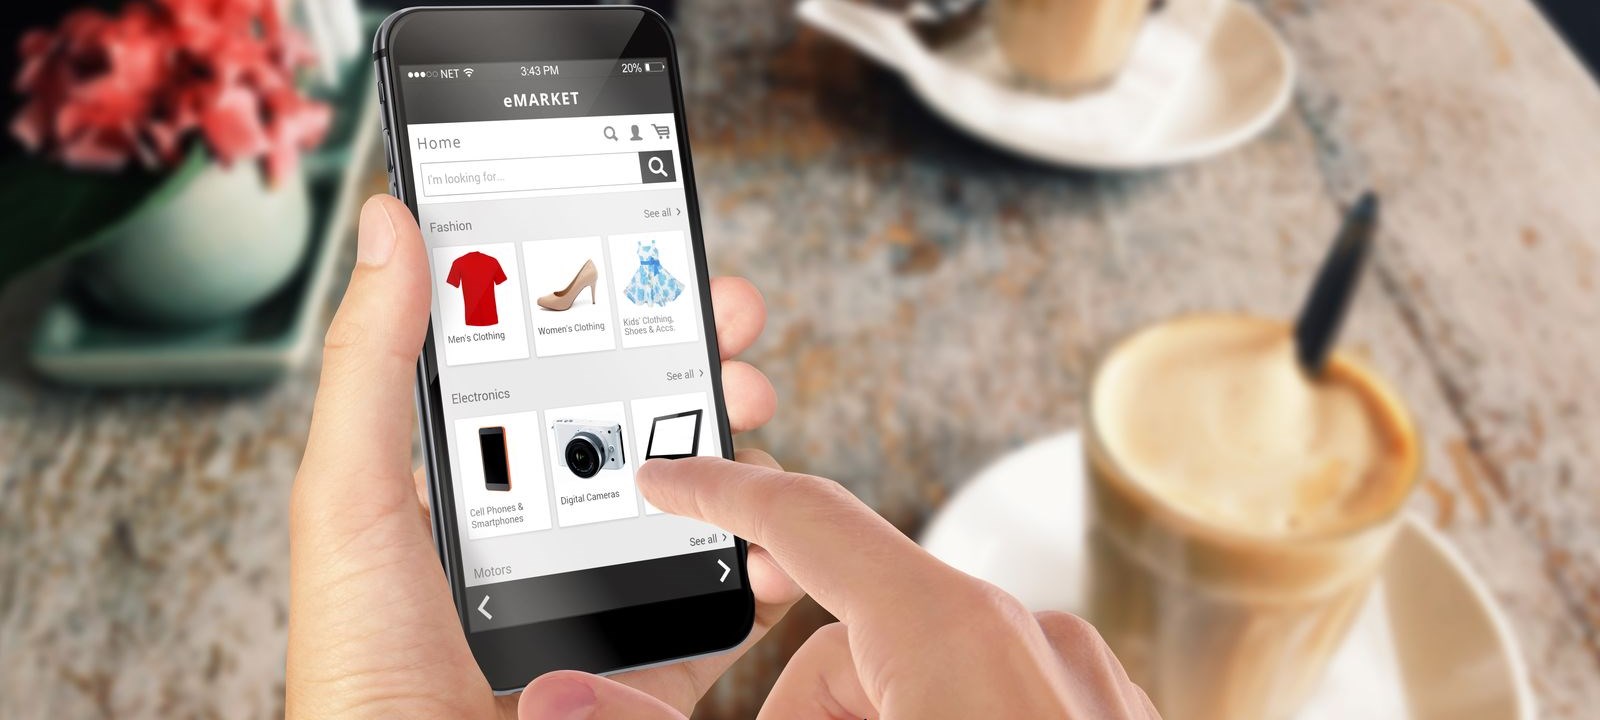 Evolution of Retail, Pt. 2: Omni-Channel Strategy & Digital Tactics in the ‘Store of the Future’